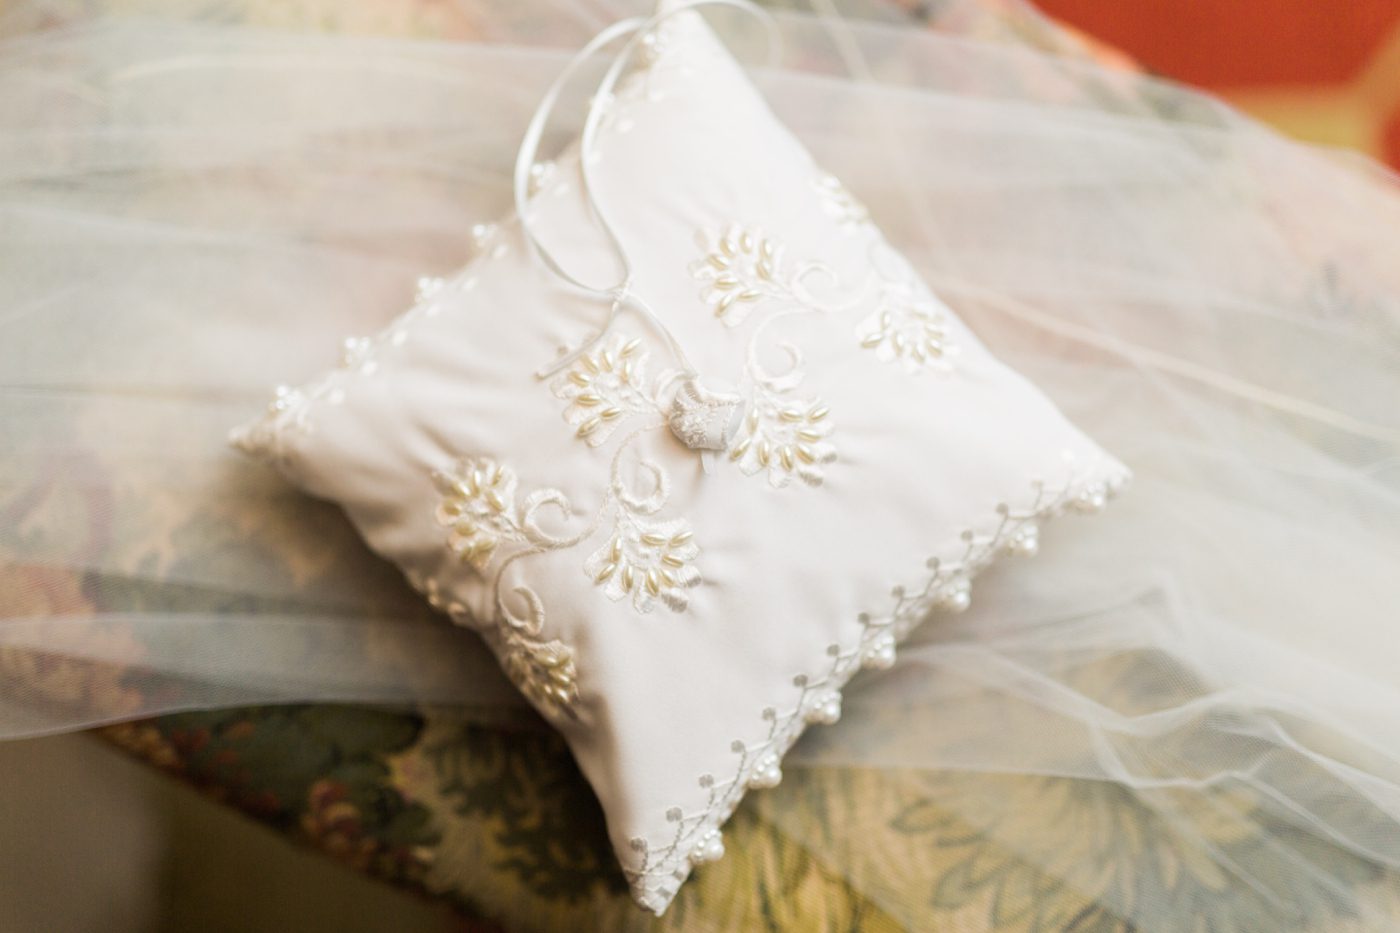 Ring bearer pillow made from mother of the brides wedding gown | Elegant William Aiken House Wedding Photos | Charleston SC wedding photographers Catherine Ann Photography